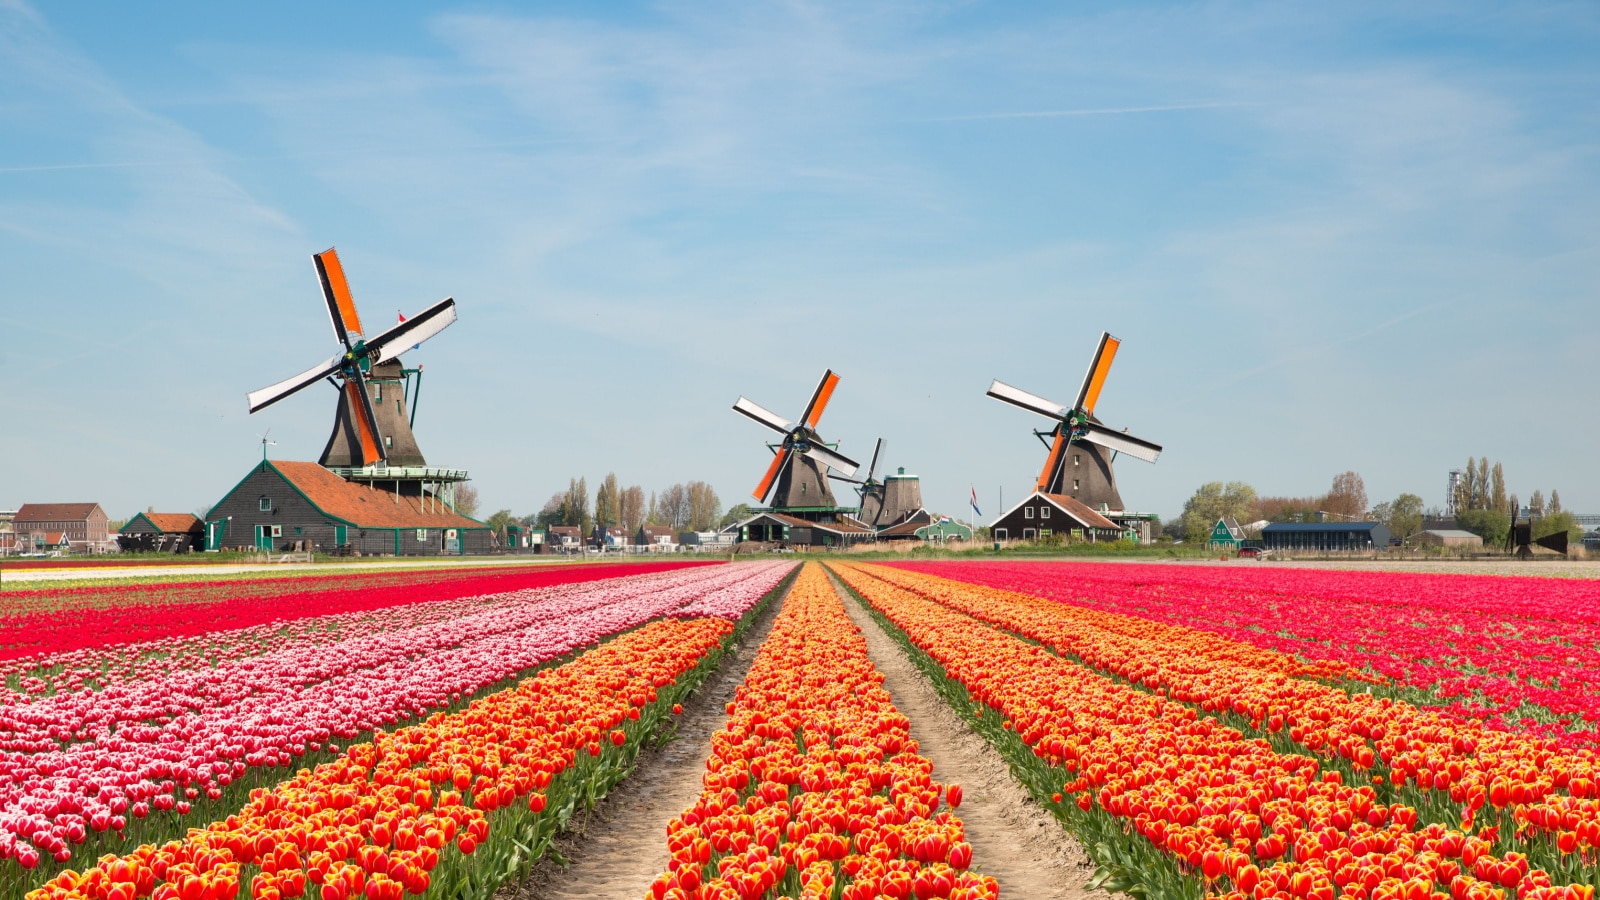 Landscape of Netherlands bouquet of tulips and windmills in the Netherlands. Spring season travel or nature landscape sightseeing in Europe concept.